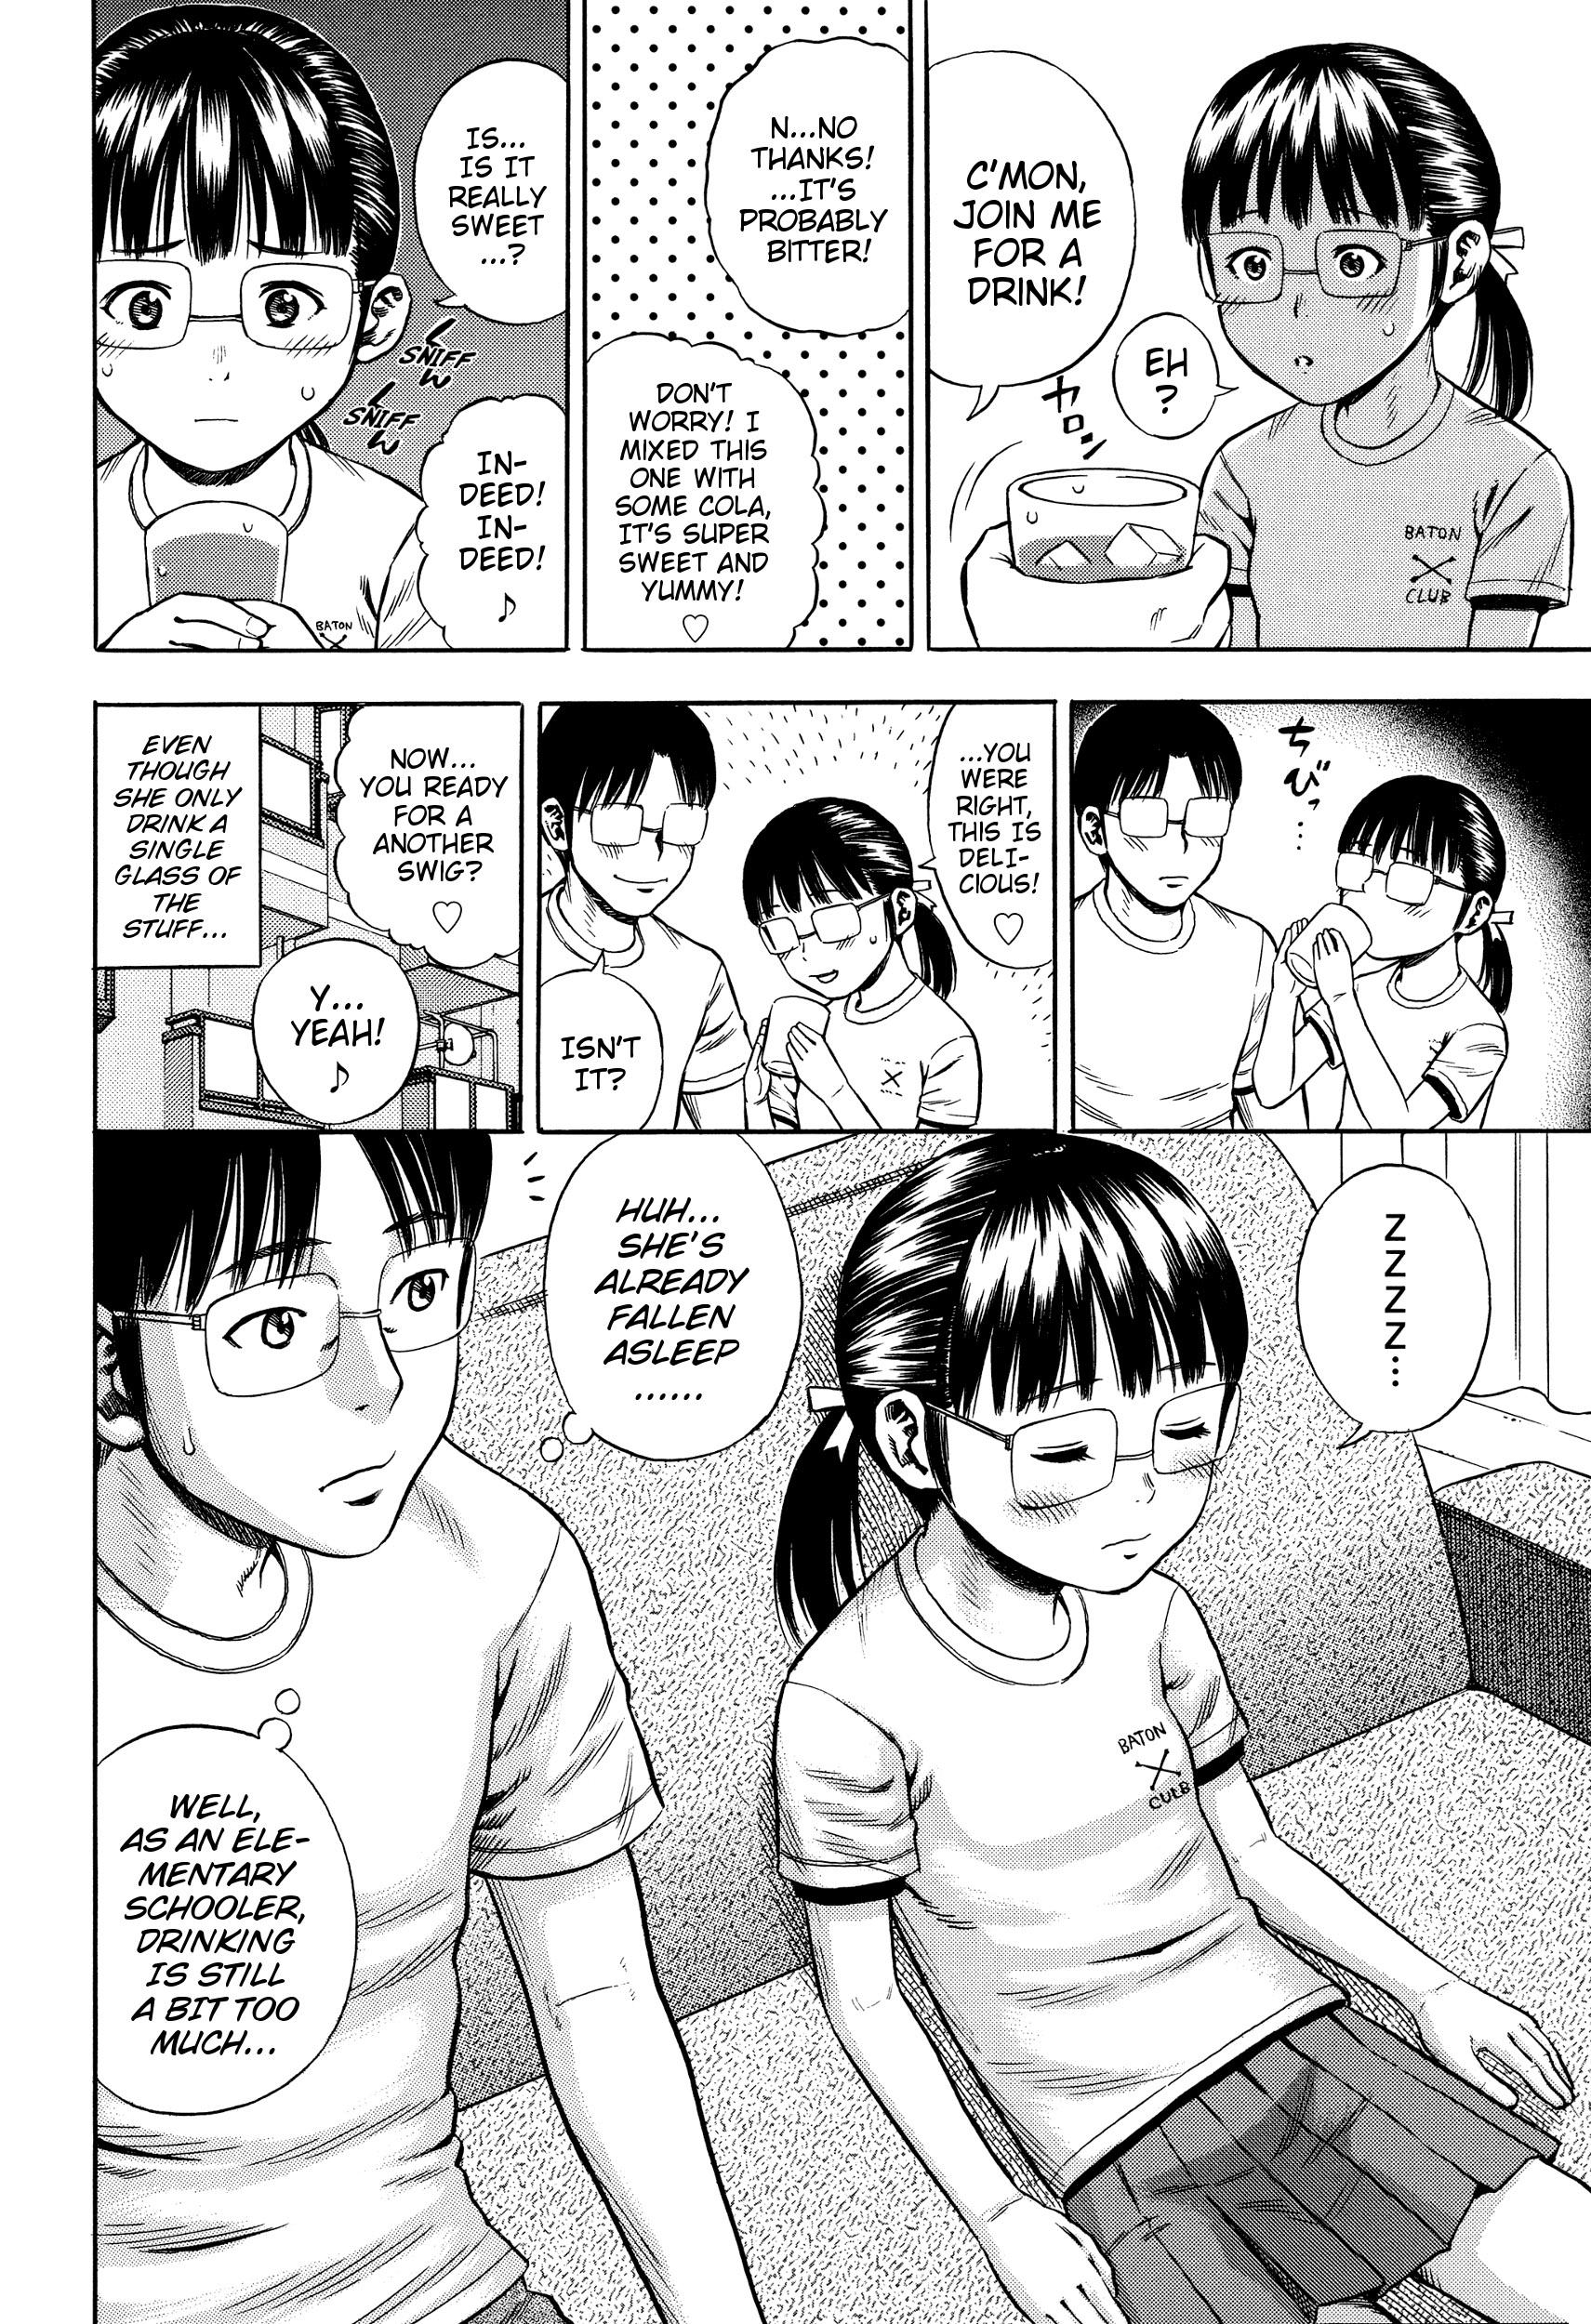 Riding Uchi no Imouto ga Warito Kawaii | My Little Sister Is Relatively Cute Butthole - Page 4